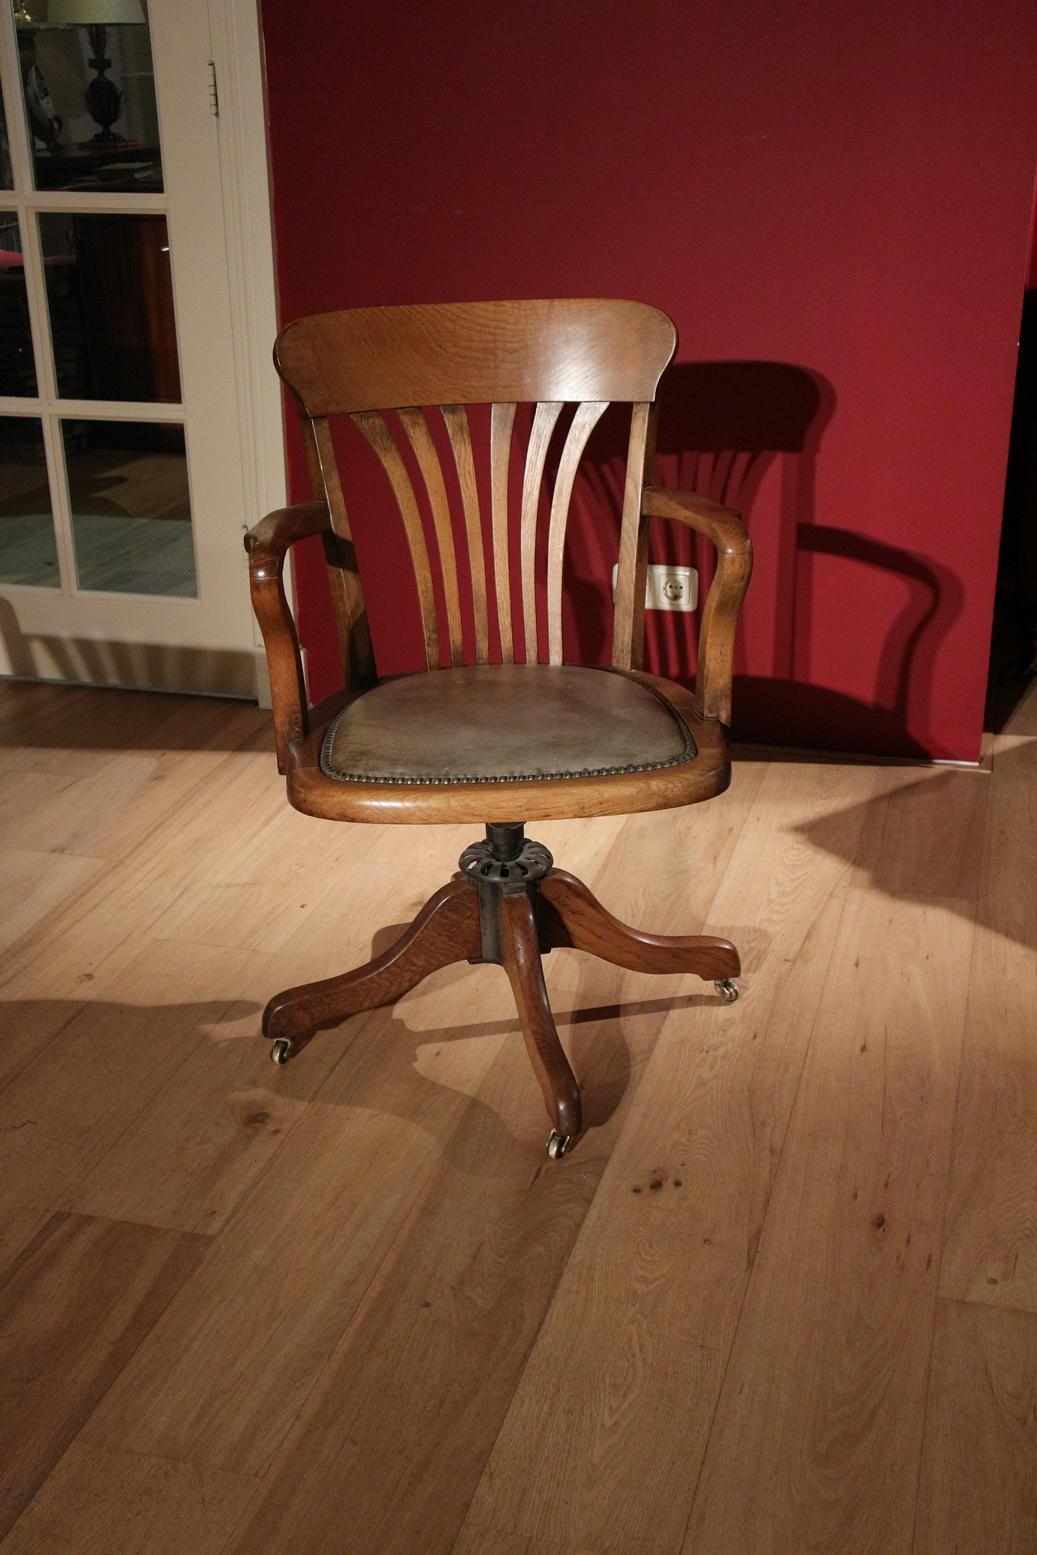 Antique oak office chair in original condition. The chair has seat-height adjustment and a rocking mechanism. Can be equipped with smooth rolling casters, especially for parquet flooring, instead of the original iron casters that are on now.